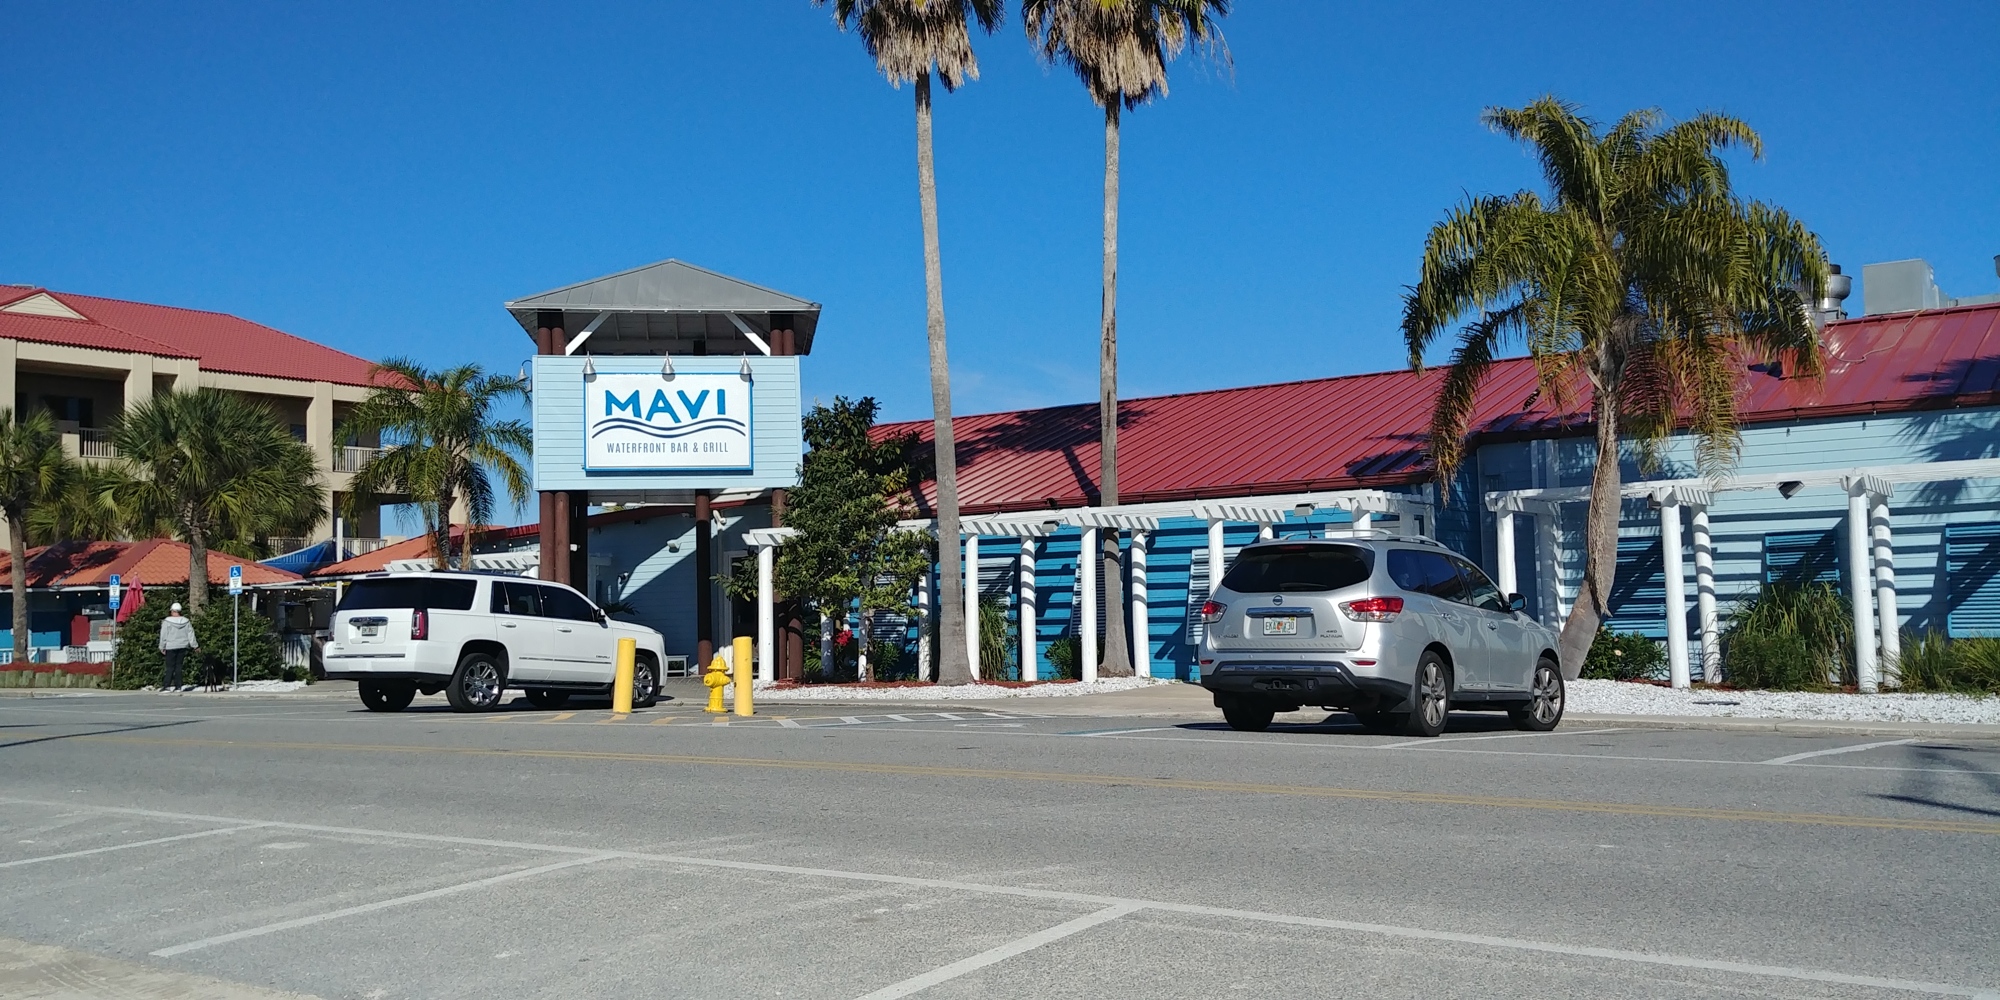 Beach Marine’s amenities comprise boat sales and service, a bait shop, 350 wet slips, 350 dry slips and Mavi Waterfront Bar & Grill.